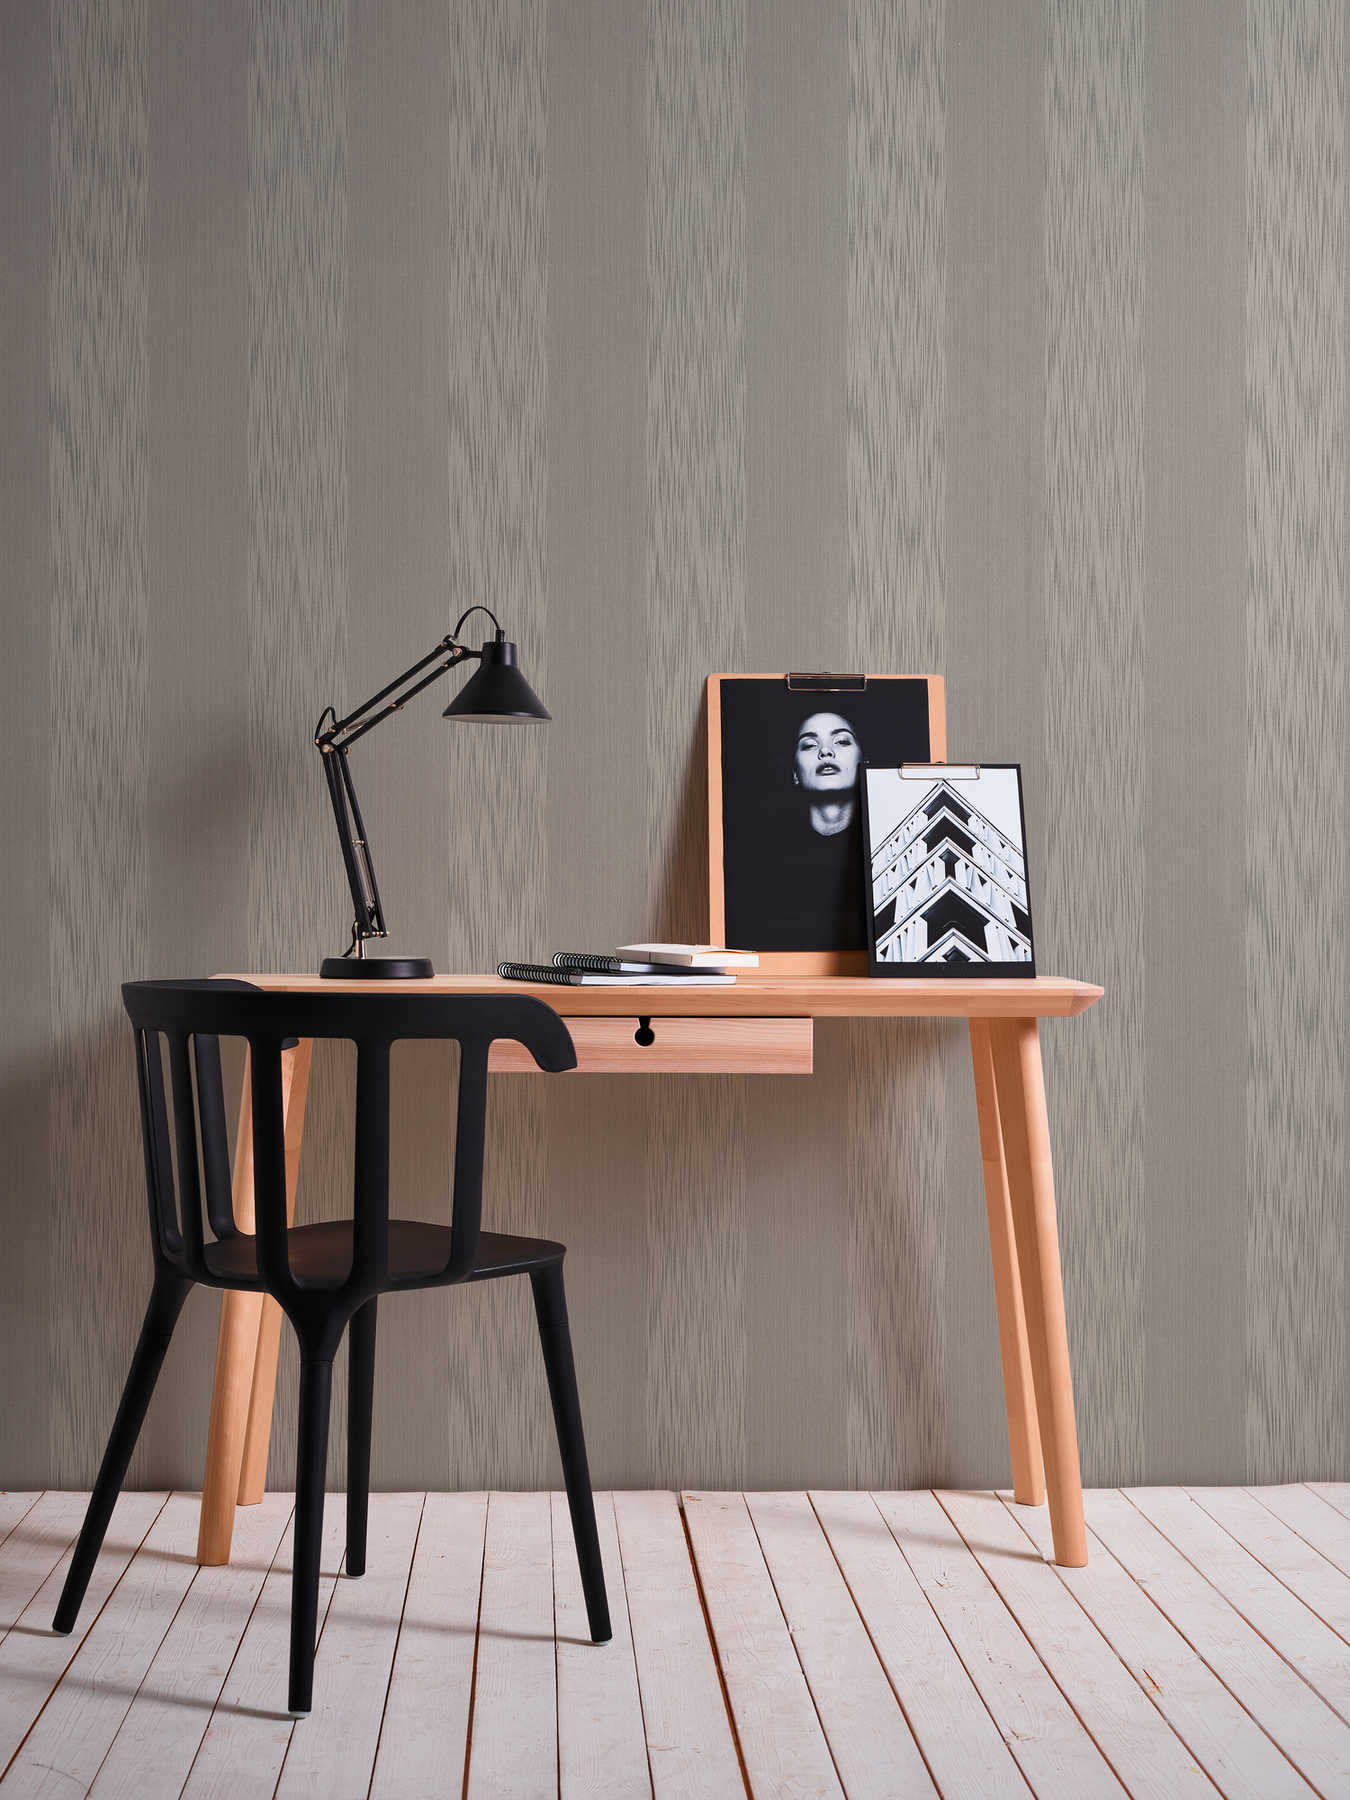             Melange stripes wallpaper with texture effect - grey
        